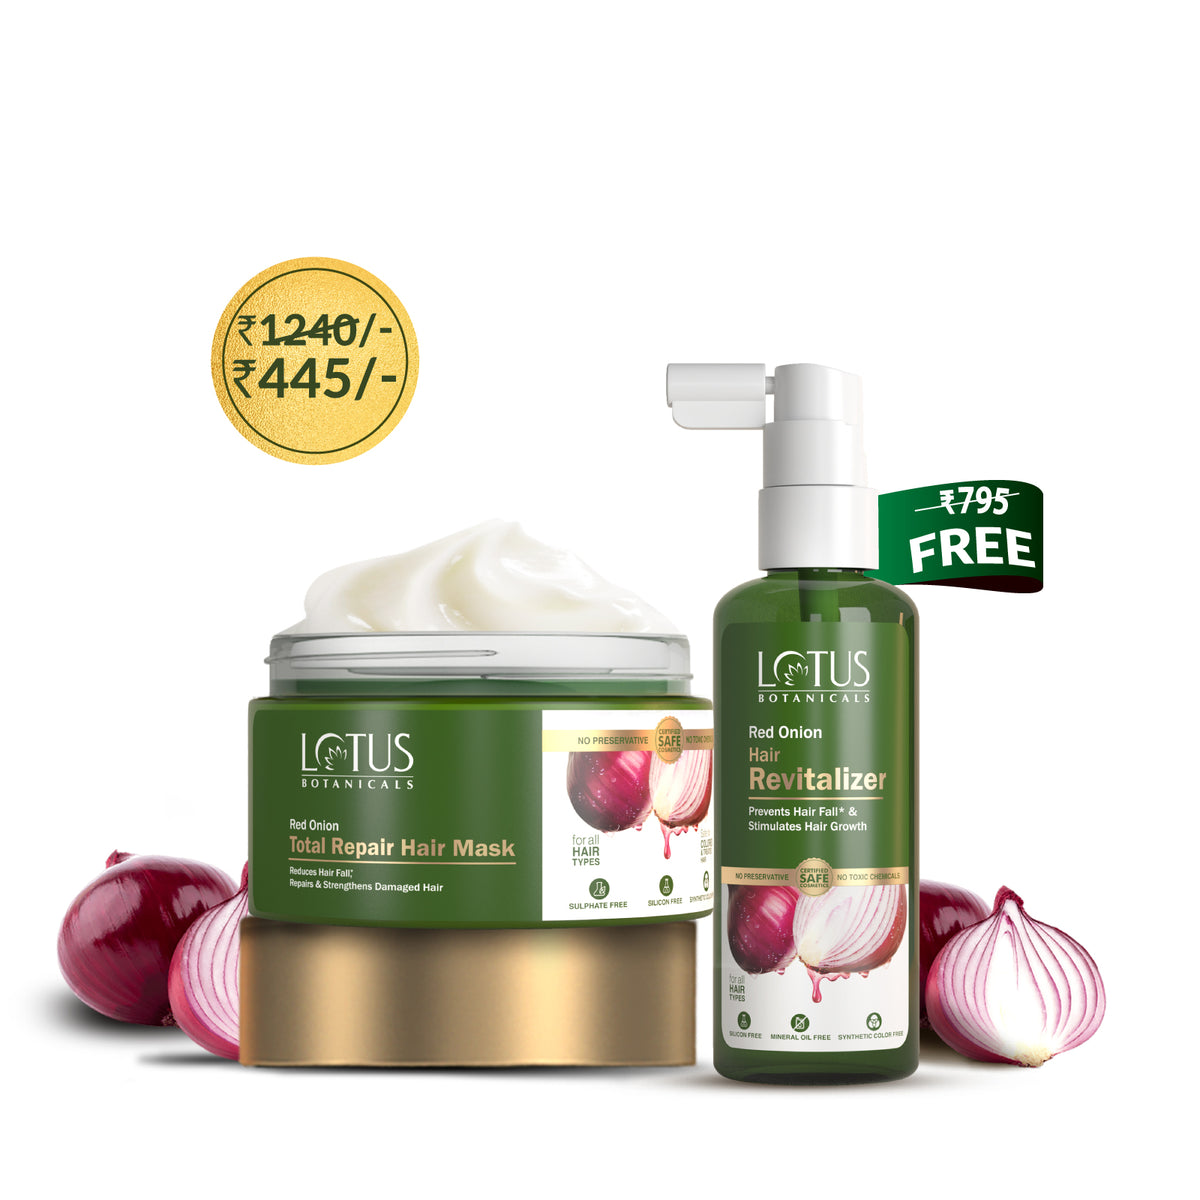 Buy Red Onion Mask, Get Hair Revitalizer Free